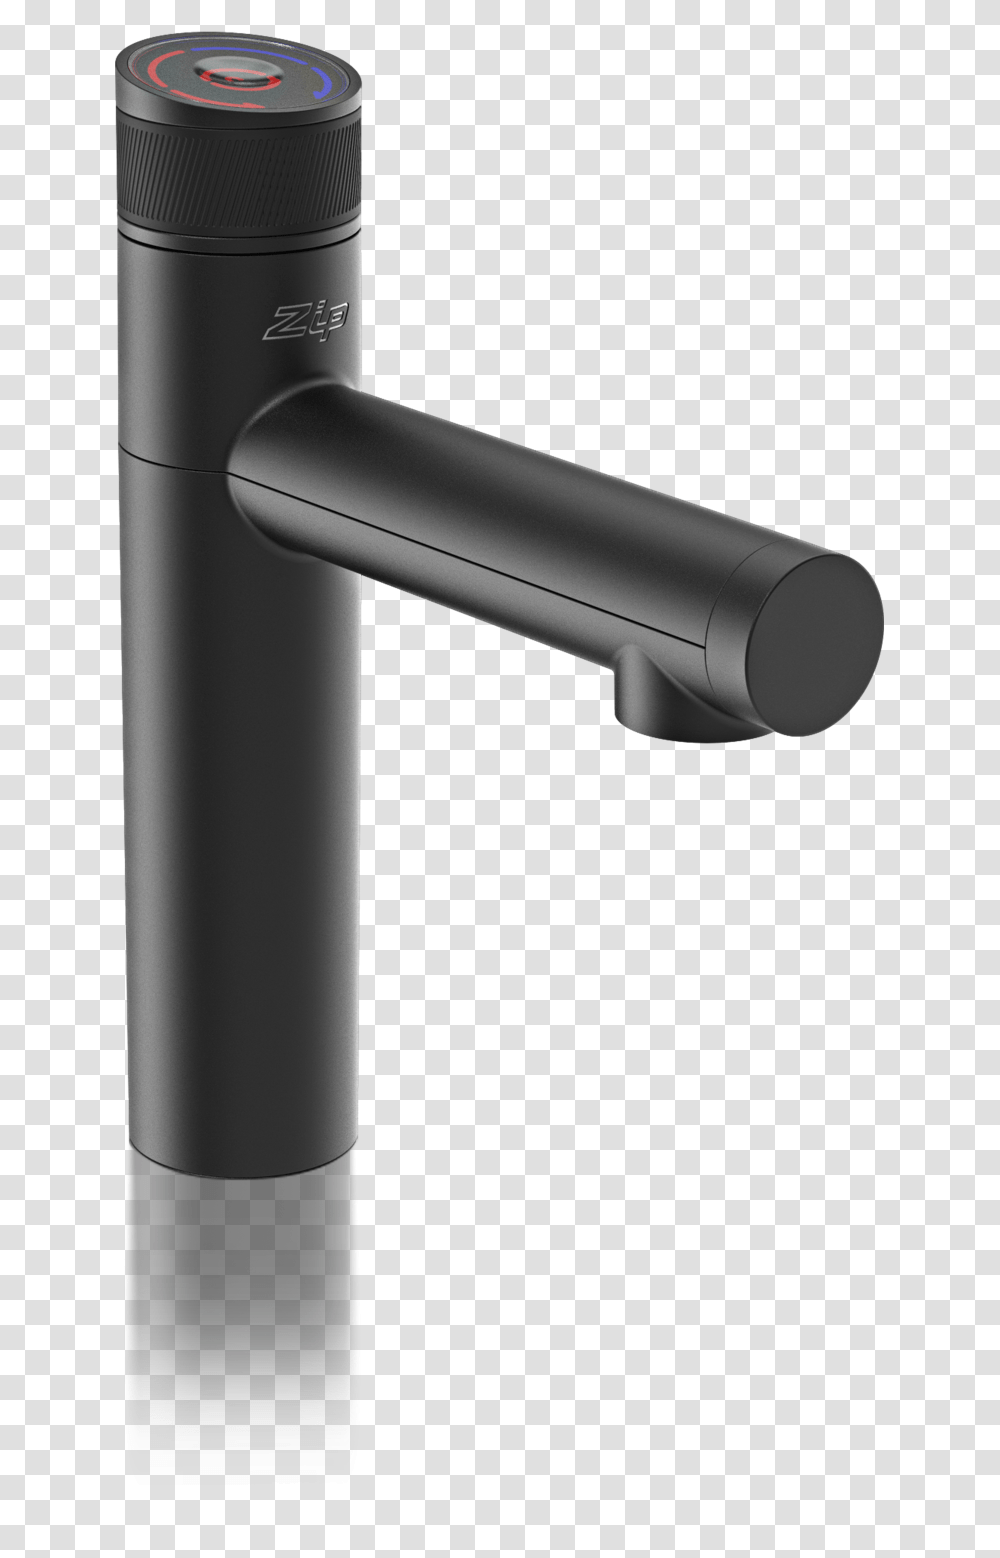 Micro Tap Withoutextention Matteblack Optical Instrument, Sink Faucet, Hammer, Tool, Indoors Transparent Png